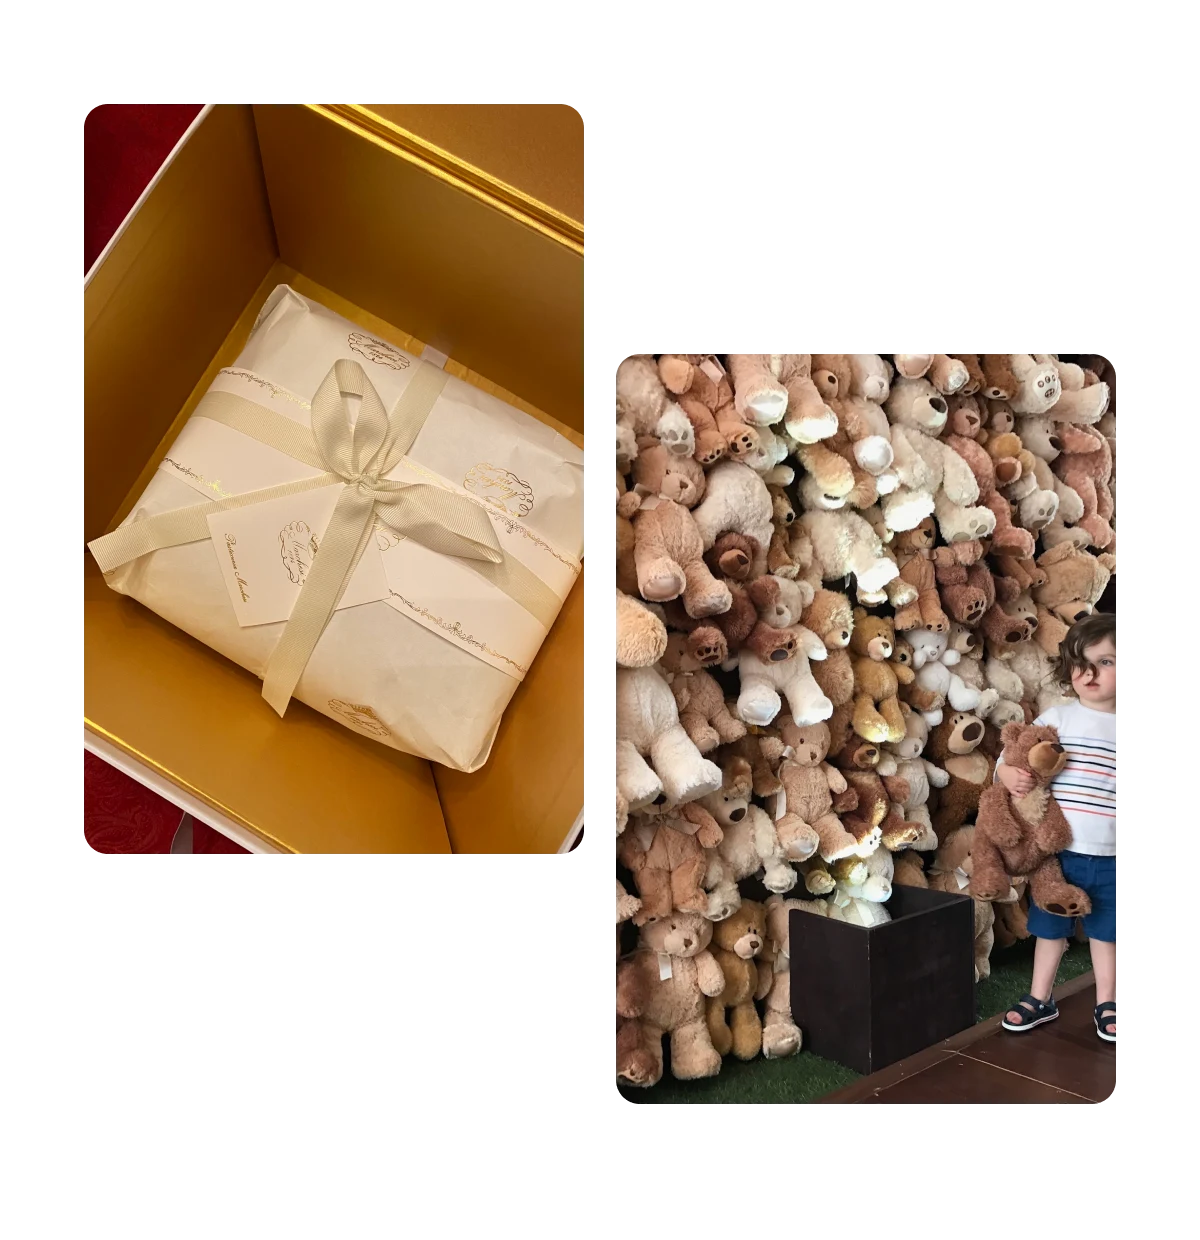 Two pins, gift box, wall of teddy bears